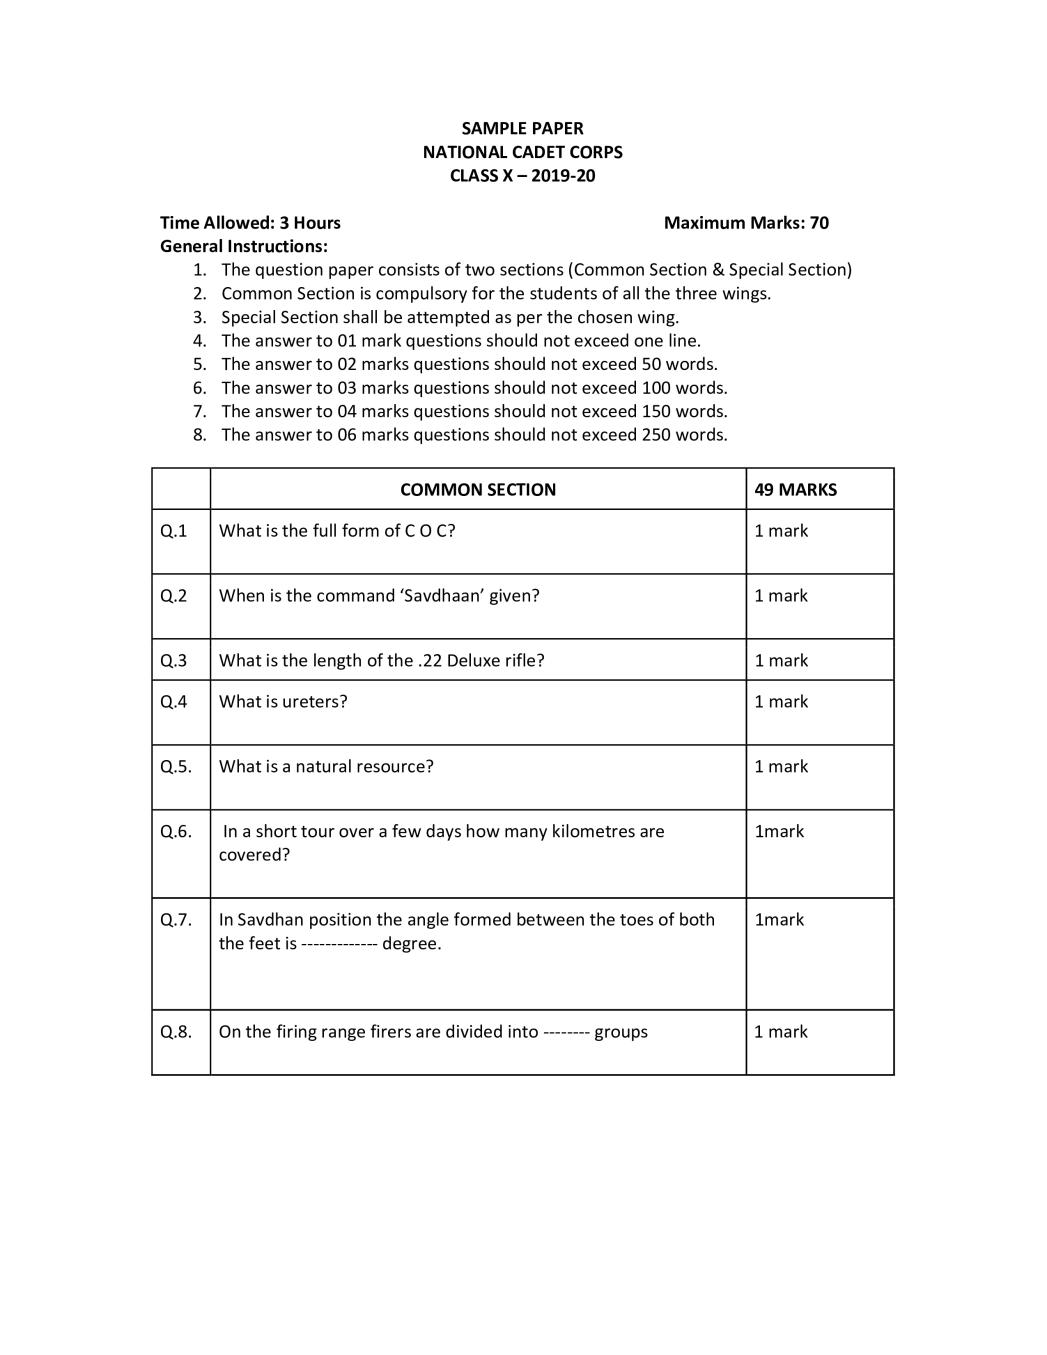 CBSE Class 10 Sample Paper 2020 for NCC - Page 1